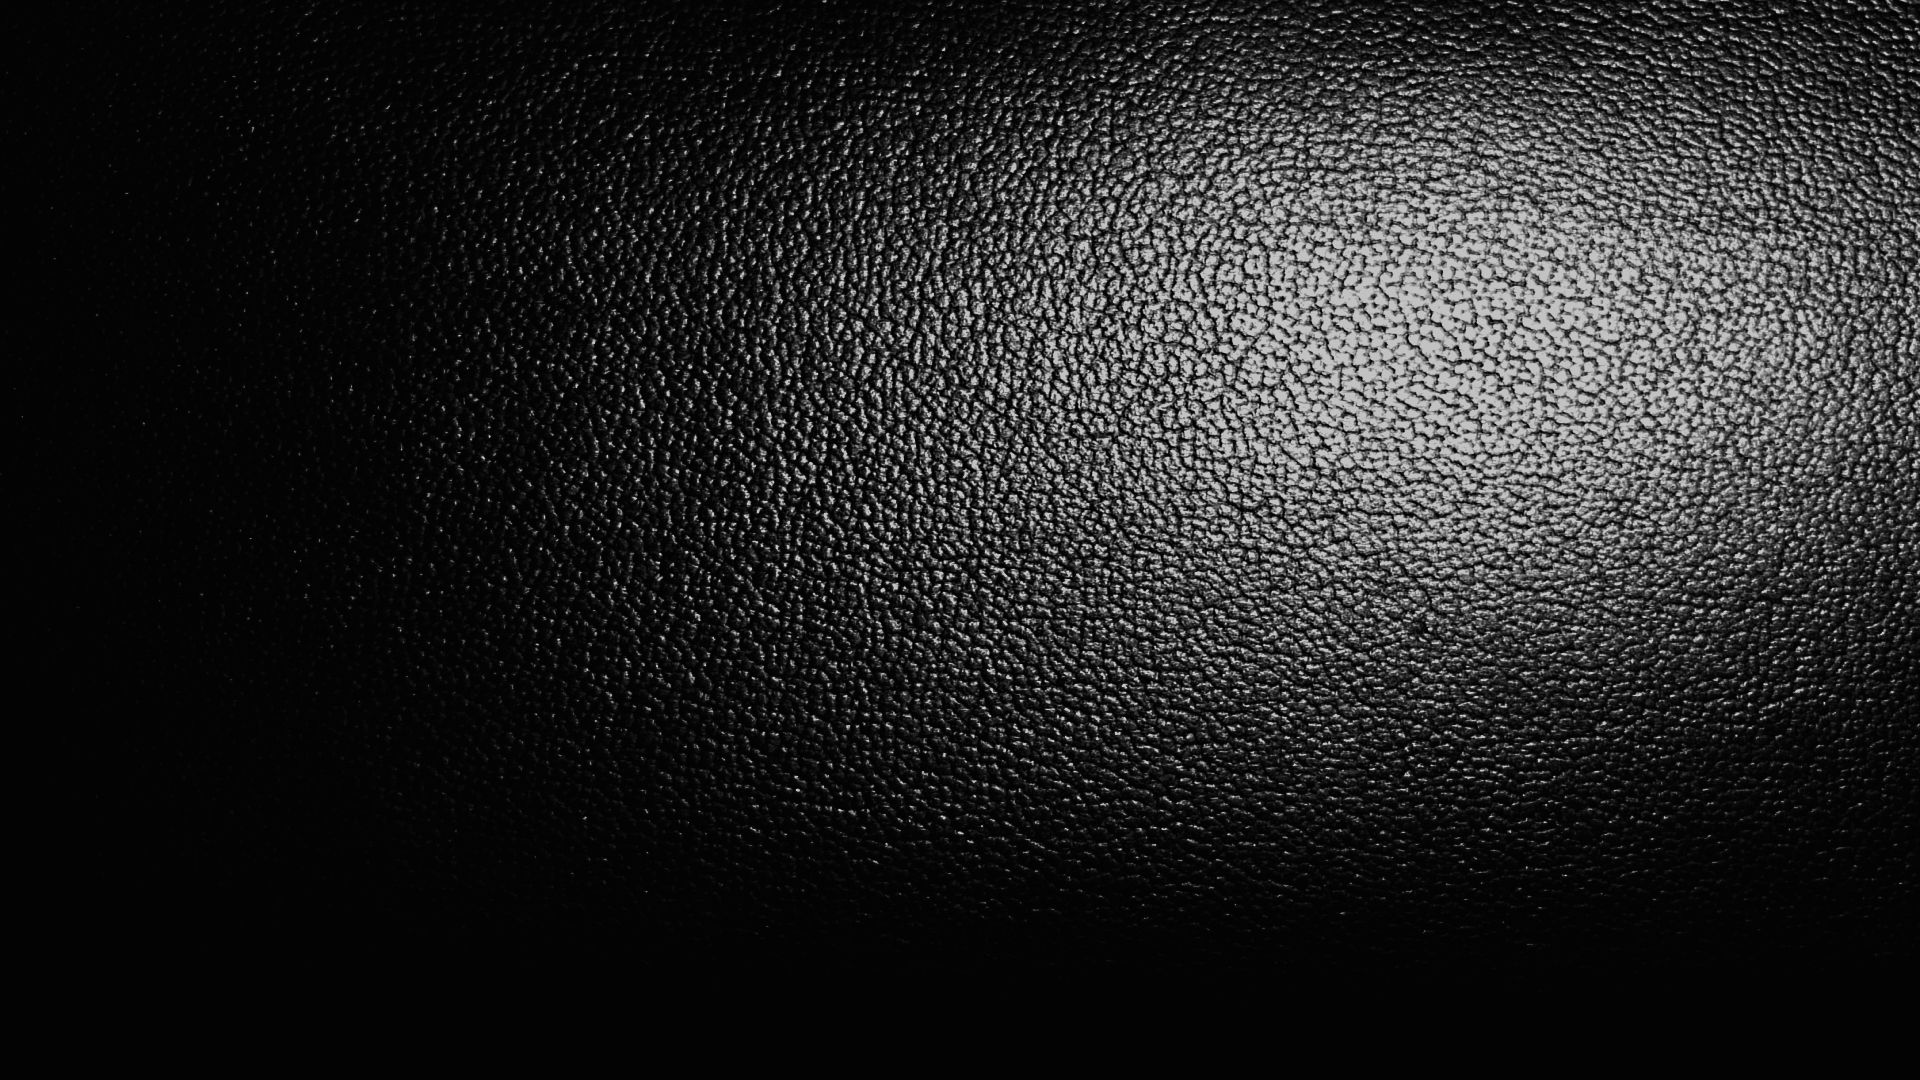 Download Leather Textures Wallpaper 1920x1080 | Full HD Wallpapers